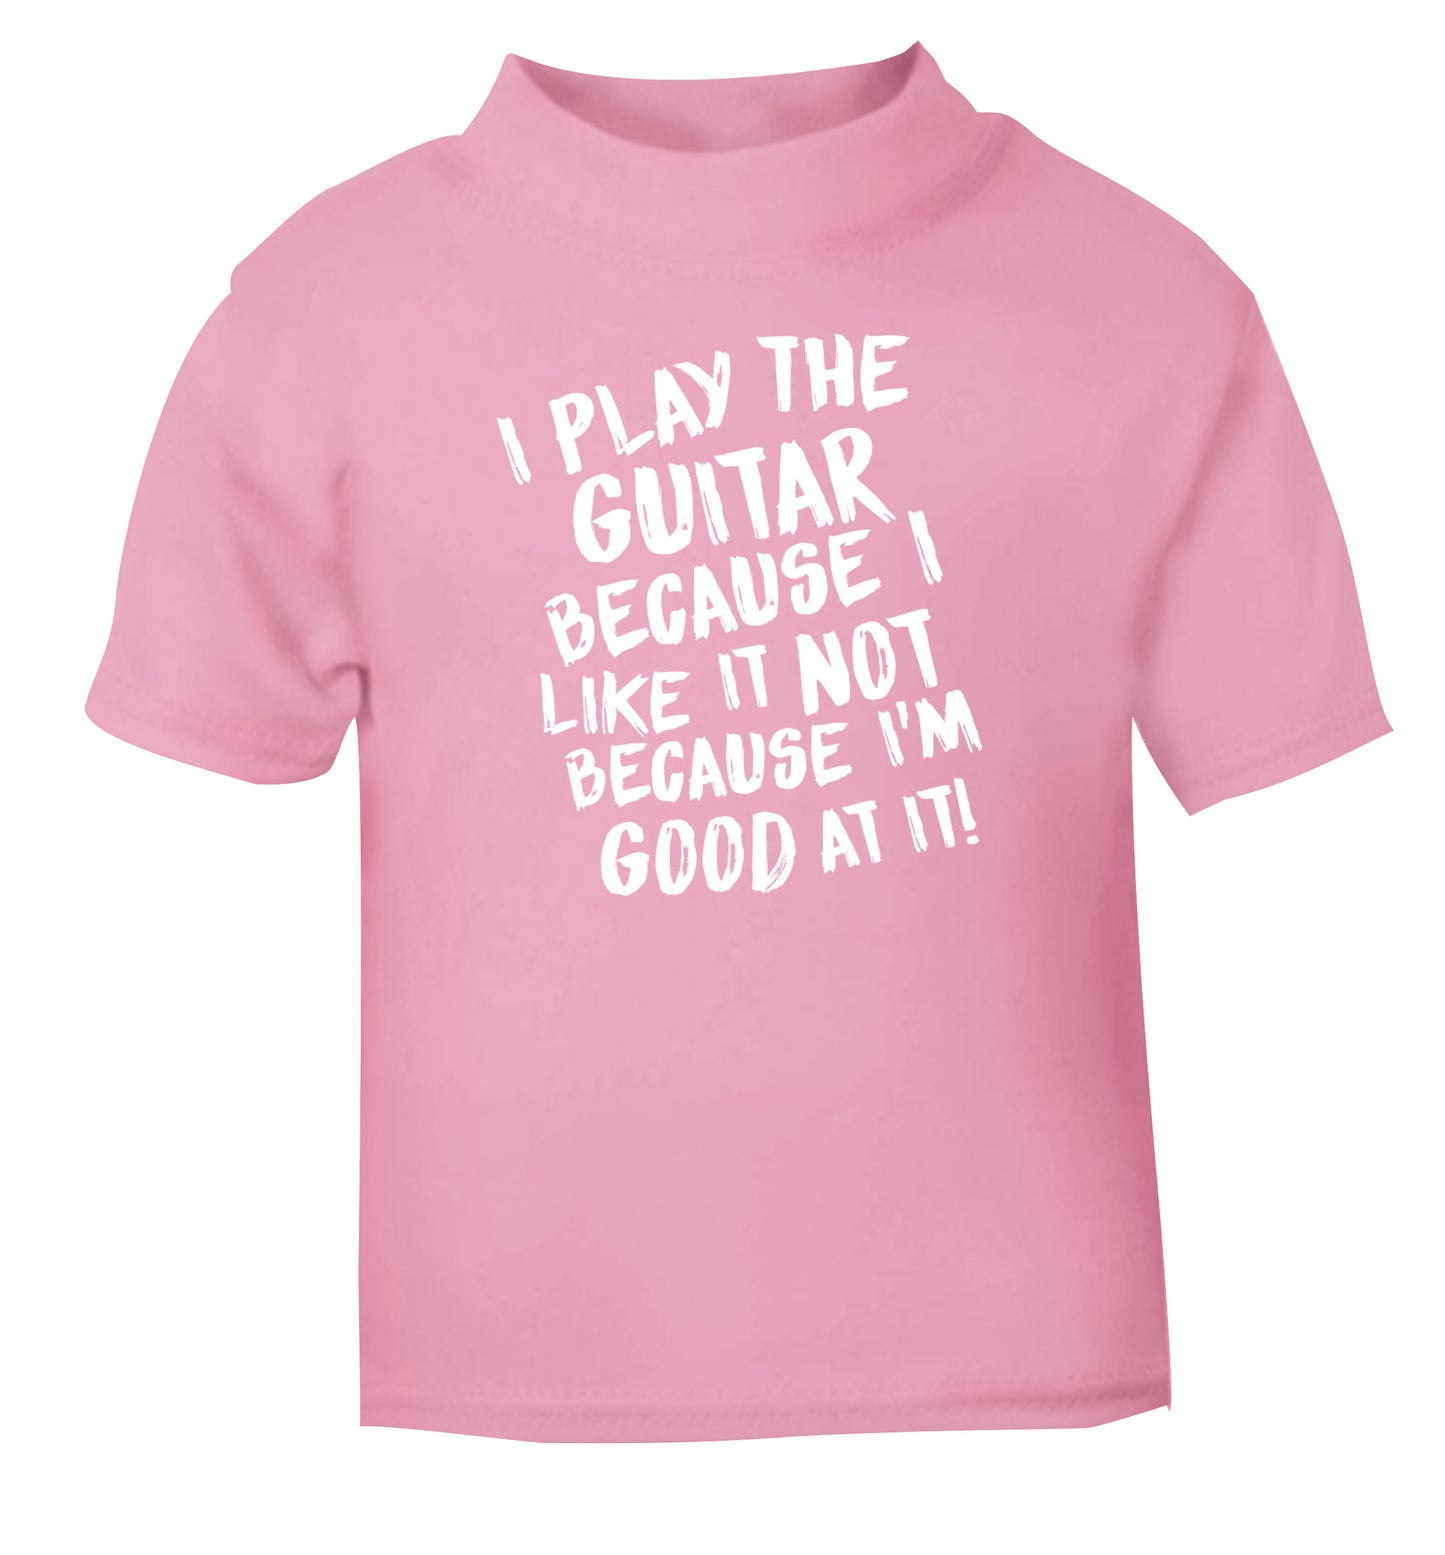 I play the guitar because I like it not because I'm good at it light pink Baby Toddler Tshirt 2 Years